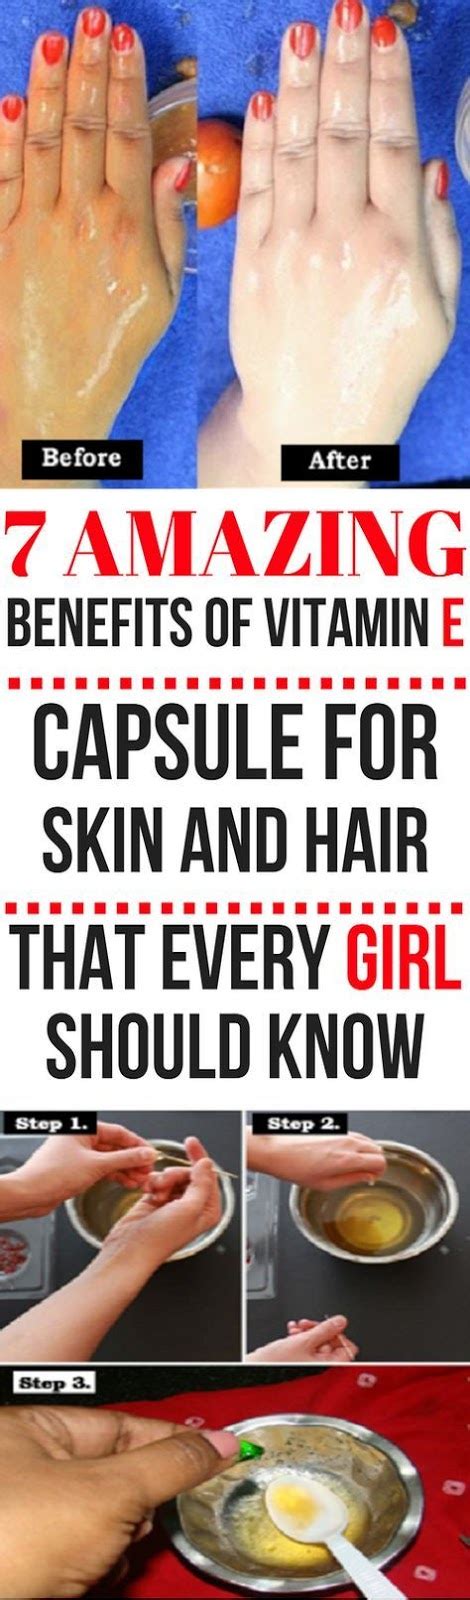 Since vitamin e is fat soluble, vitamin e supplements are more easily absorbed when taken with a meal that contains some fat to support absorption. 7 AMAZING BENEFITS OF VITAMIN E CAPSULE FOR SKIN AND HAIR ...